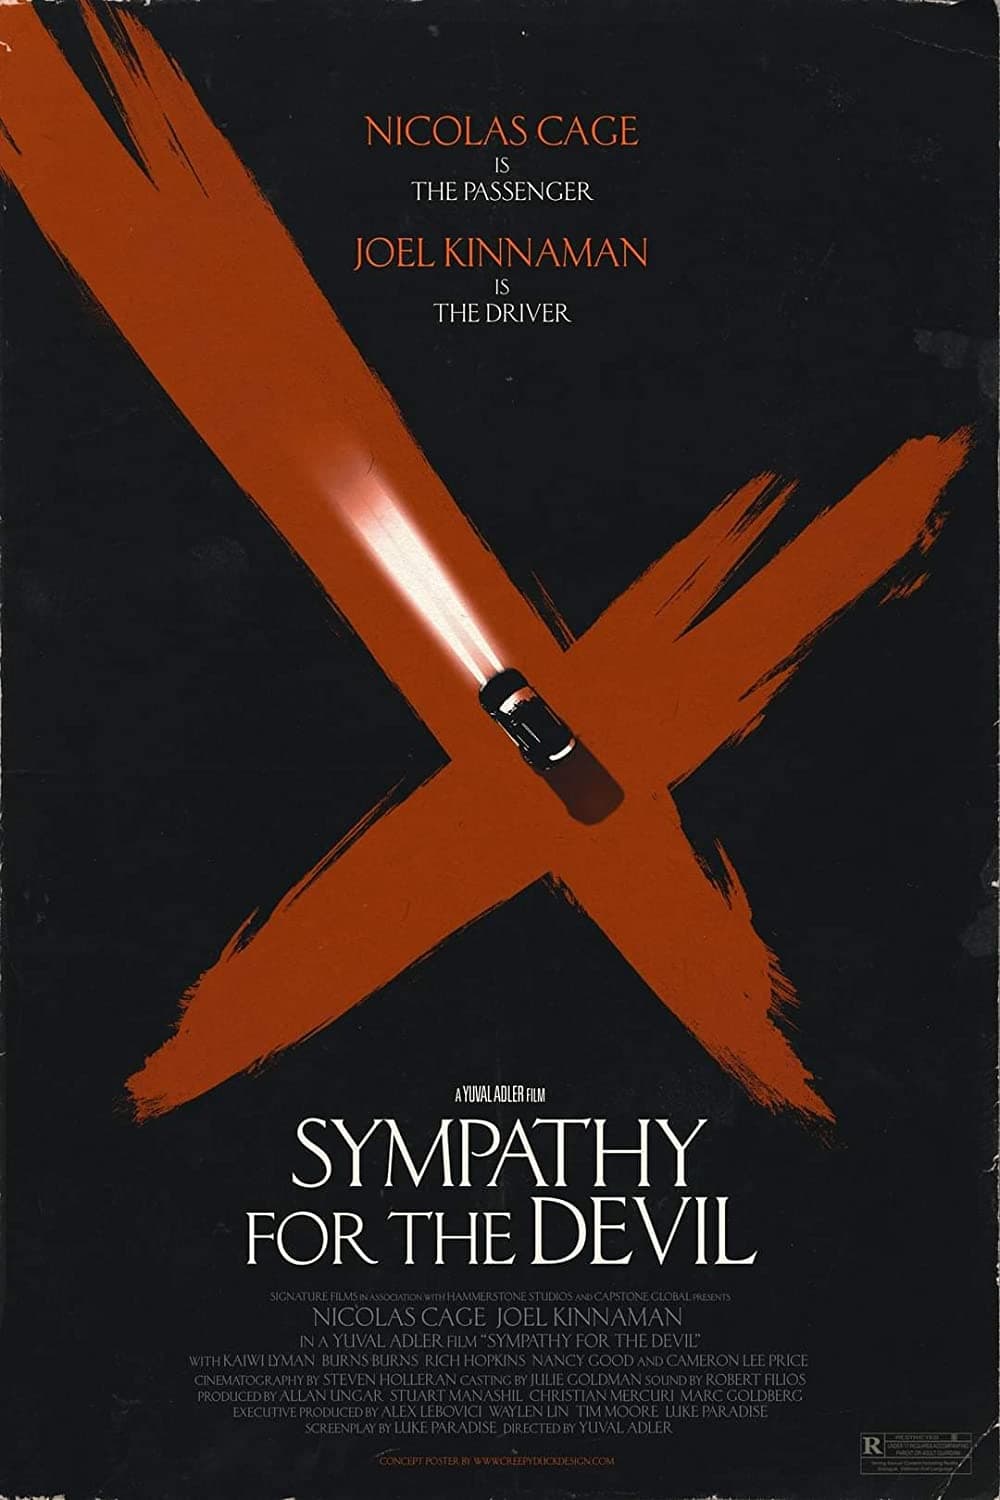 [WATCH 72+] Sympathy for the Devil (2023) FULL MOVIE ONLINE FREE ENGLISH/Dub/SUB Thriller STREAMINGS ������ Movie Poster